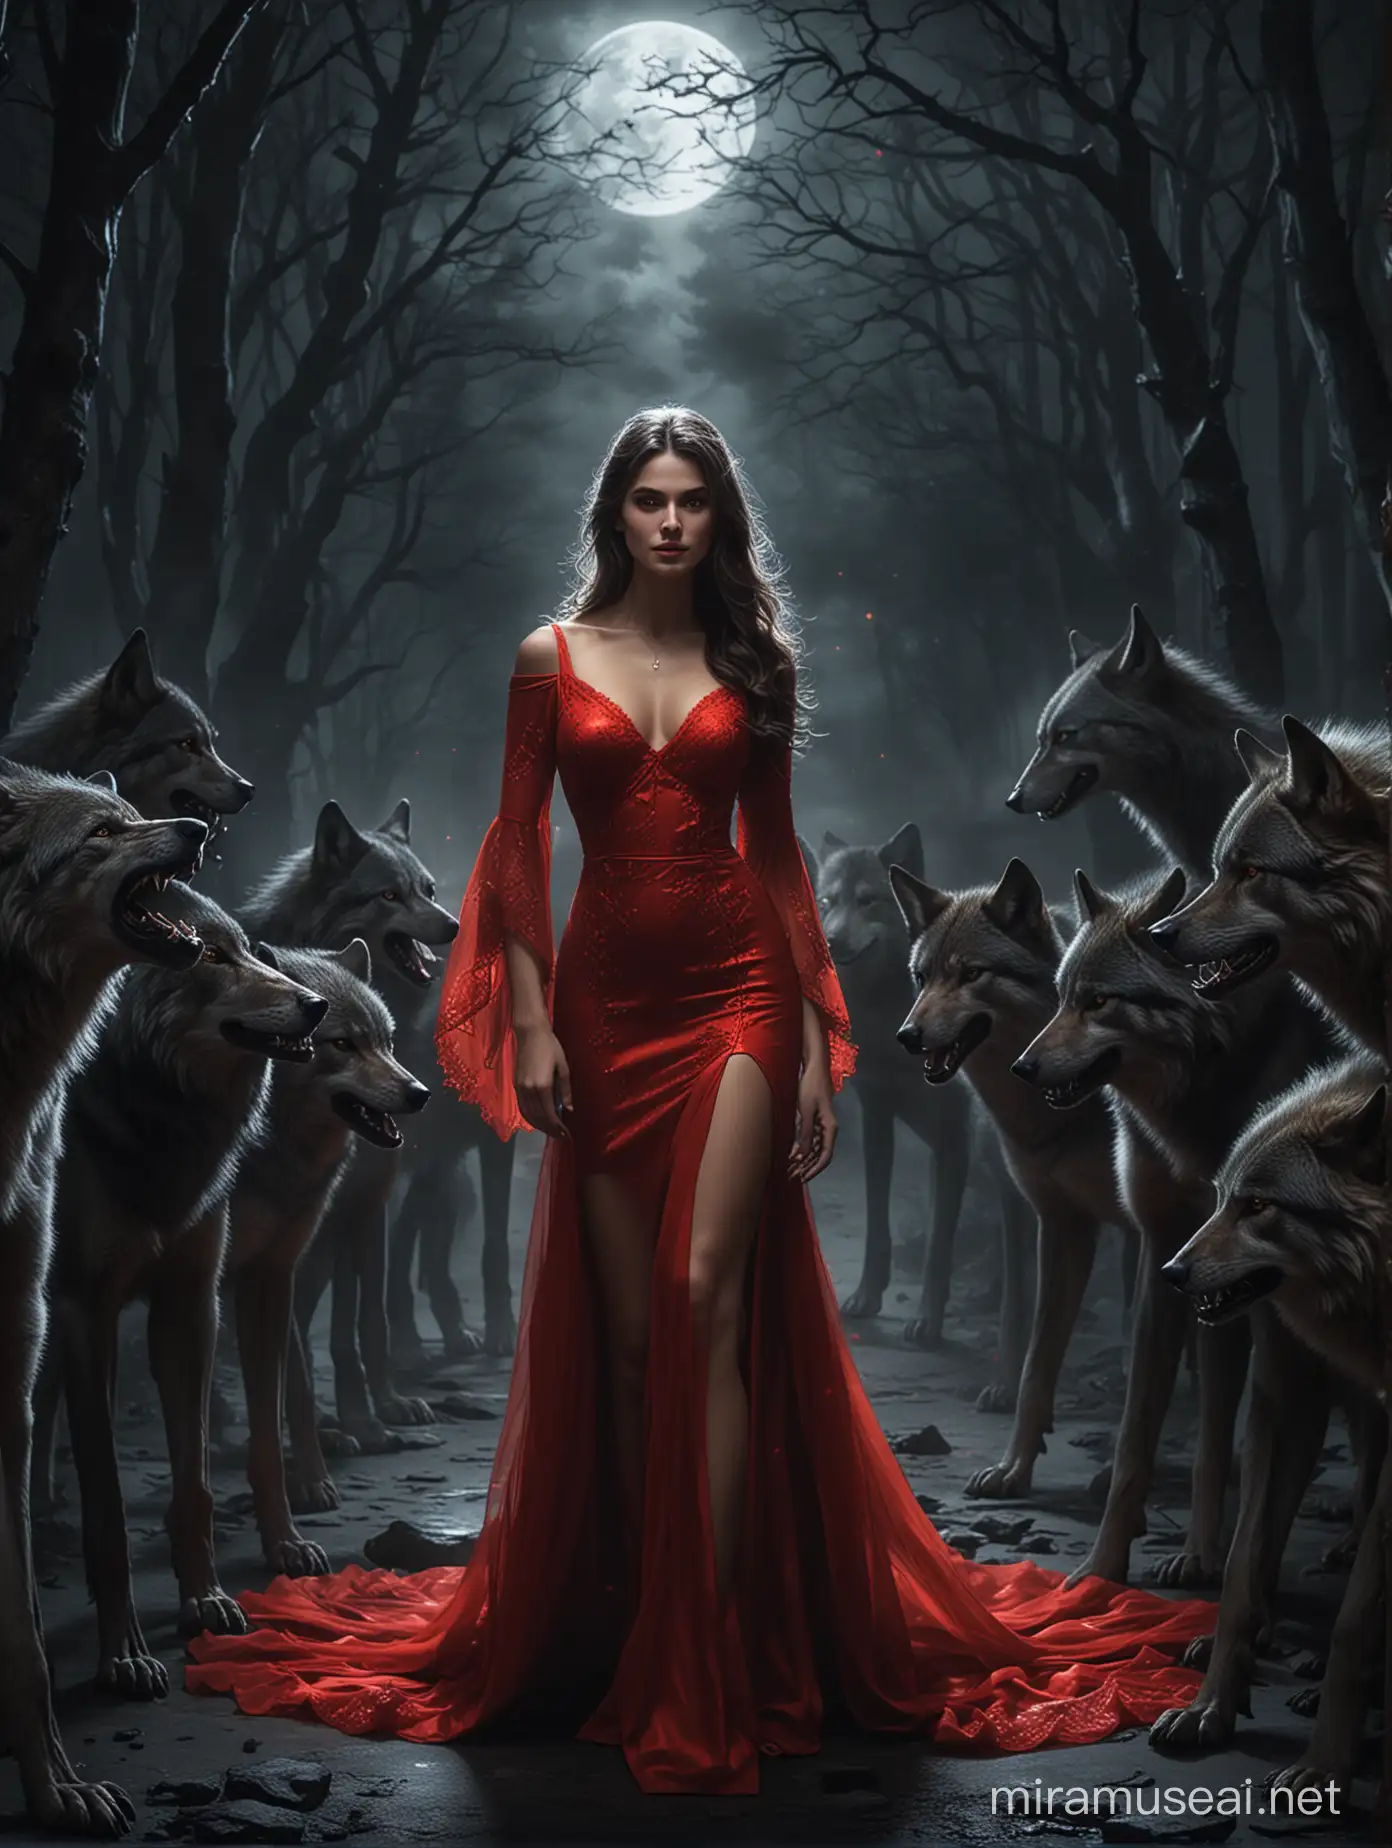 Enigmatic Woman in Radiant Crimson Dress Surrounded by Mysterious Wolves